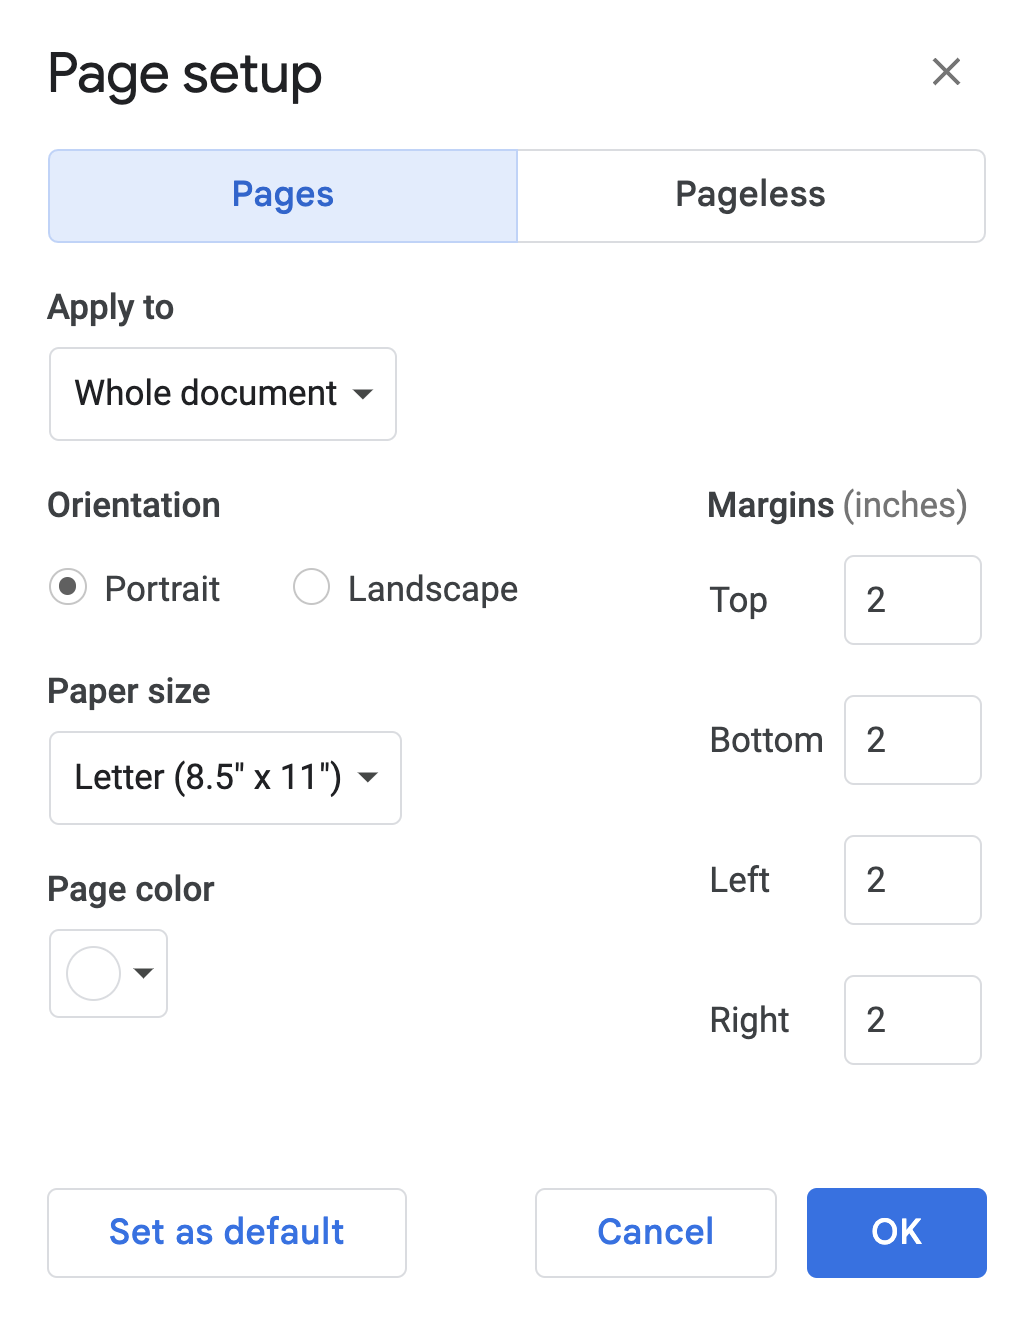 How to change the margins in Google Docs using the page setup.